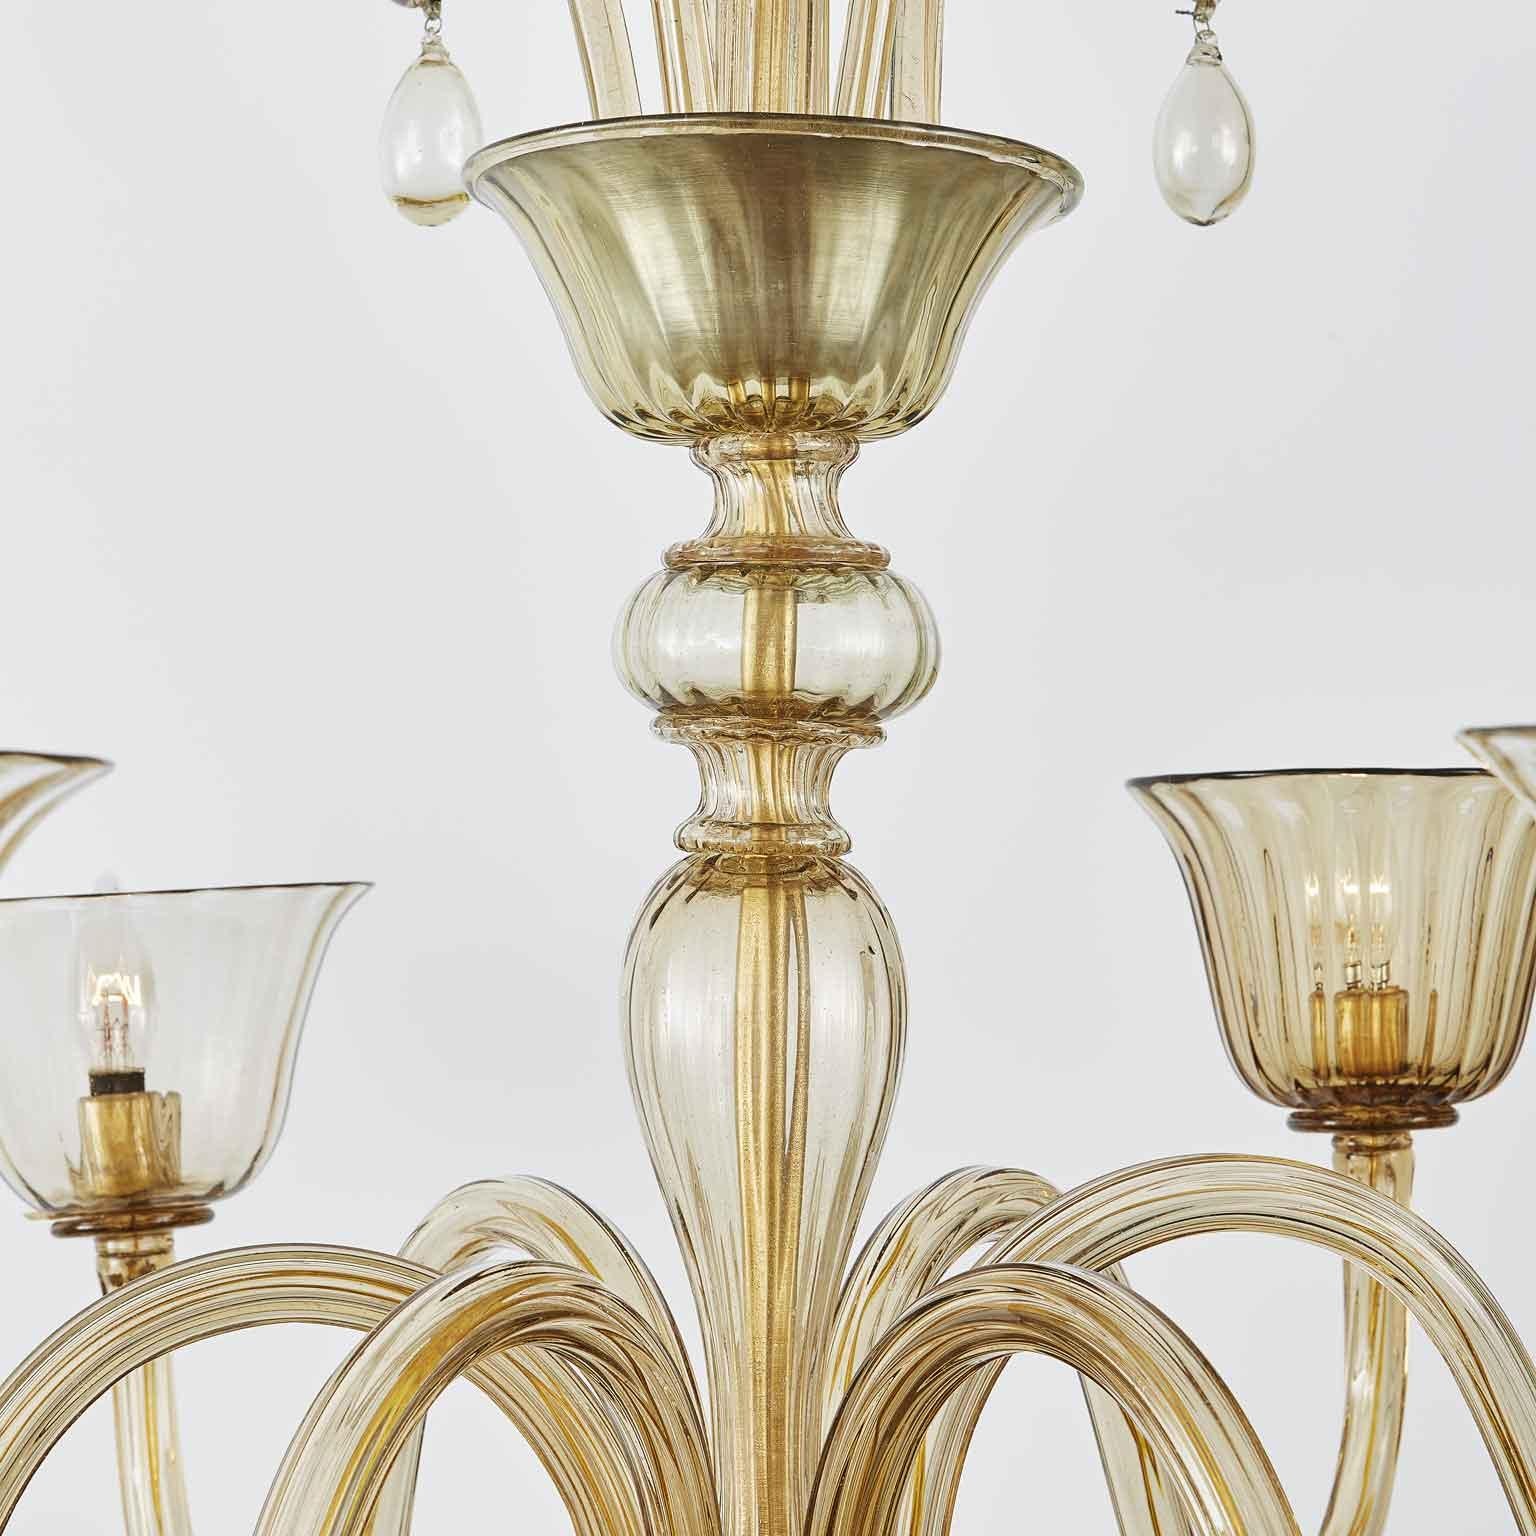 A large size Art Déco Murano blown glass six-light chandelier, a timeless fumè chandelier with extremely essential and elegant design. This hand-blown Murano glass is an exquisite rich and warm smoked tone dating back to 1920s circa.
The central